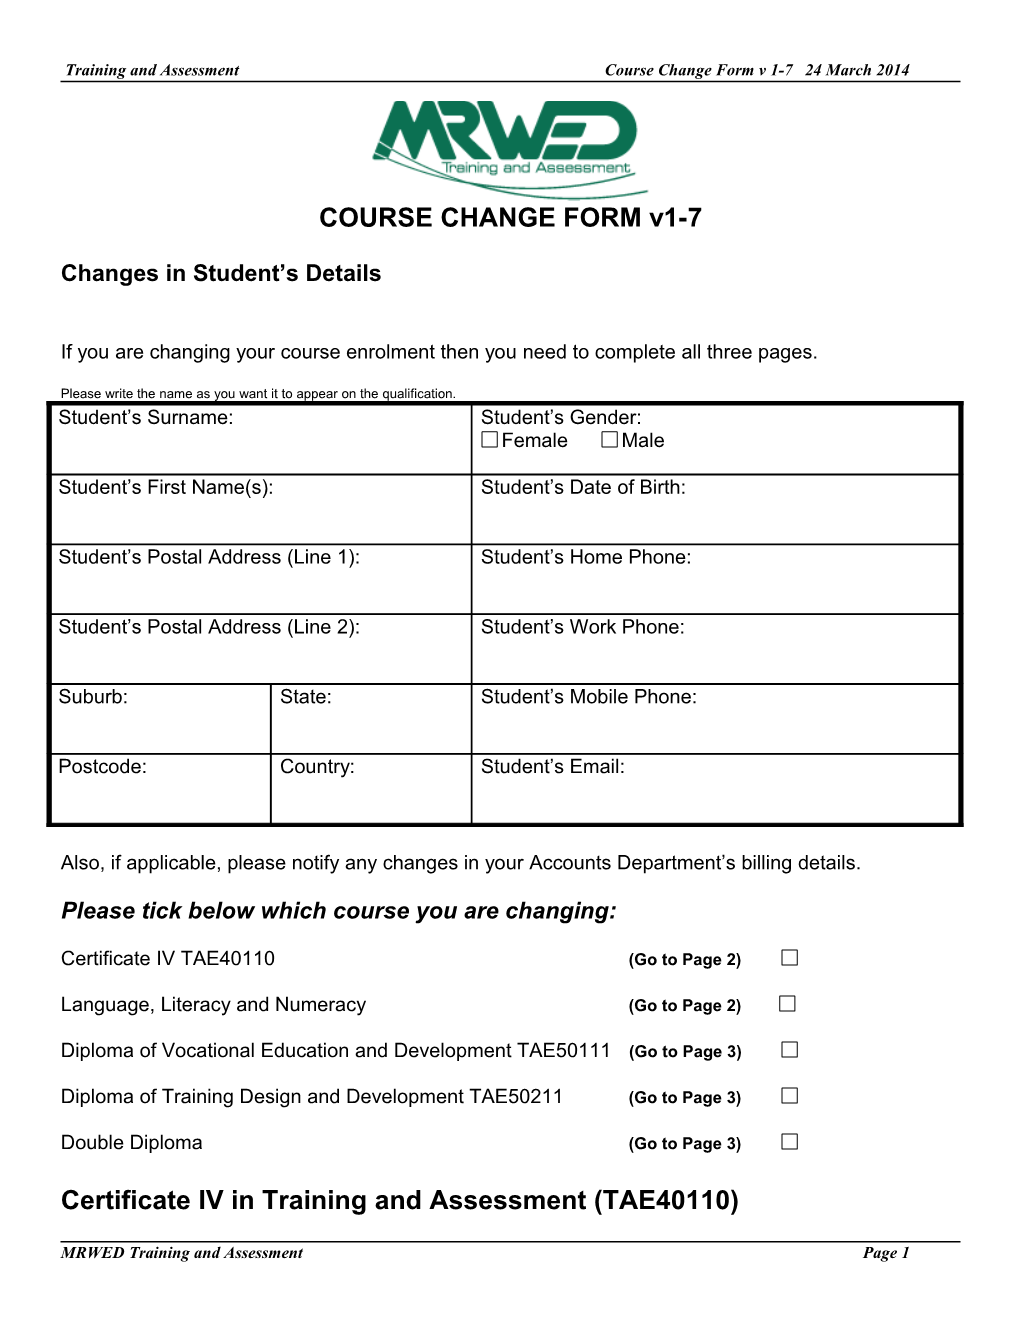 Training and Assessment Course Change Form V 1-7 24 March 2014